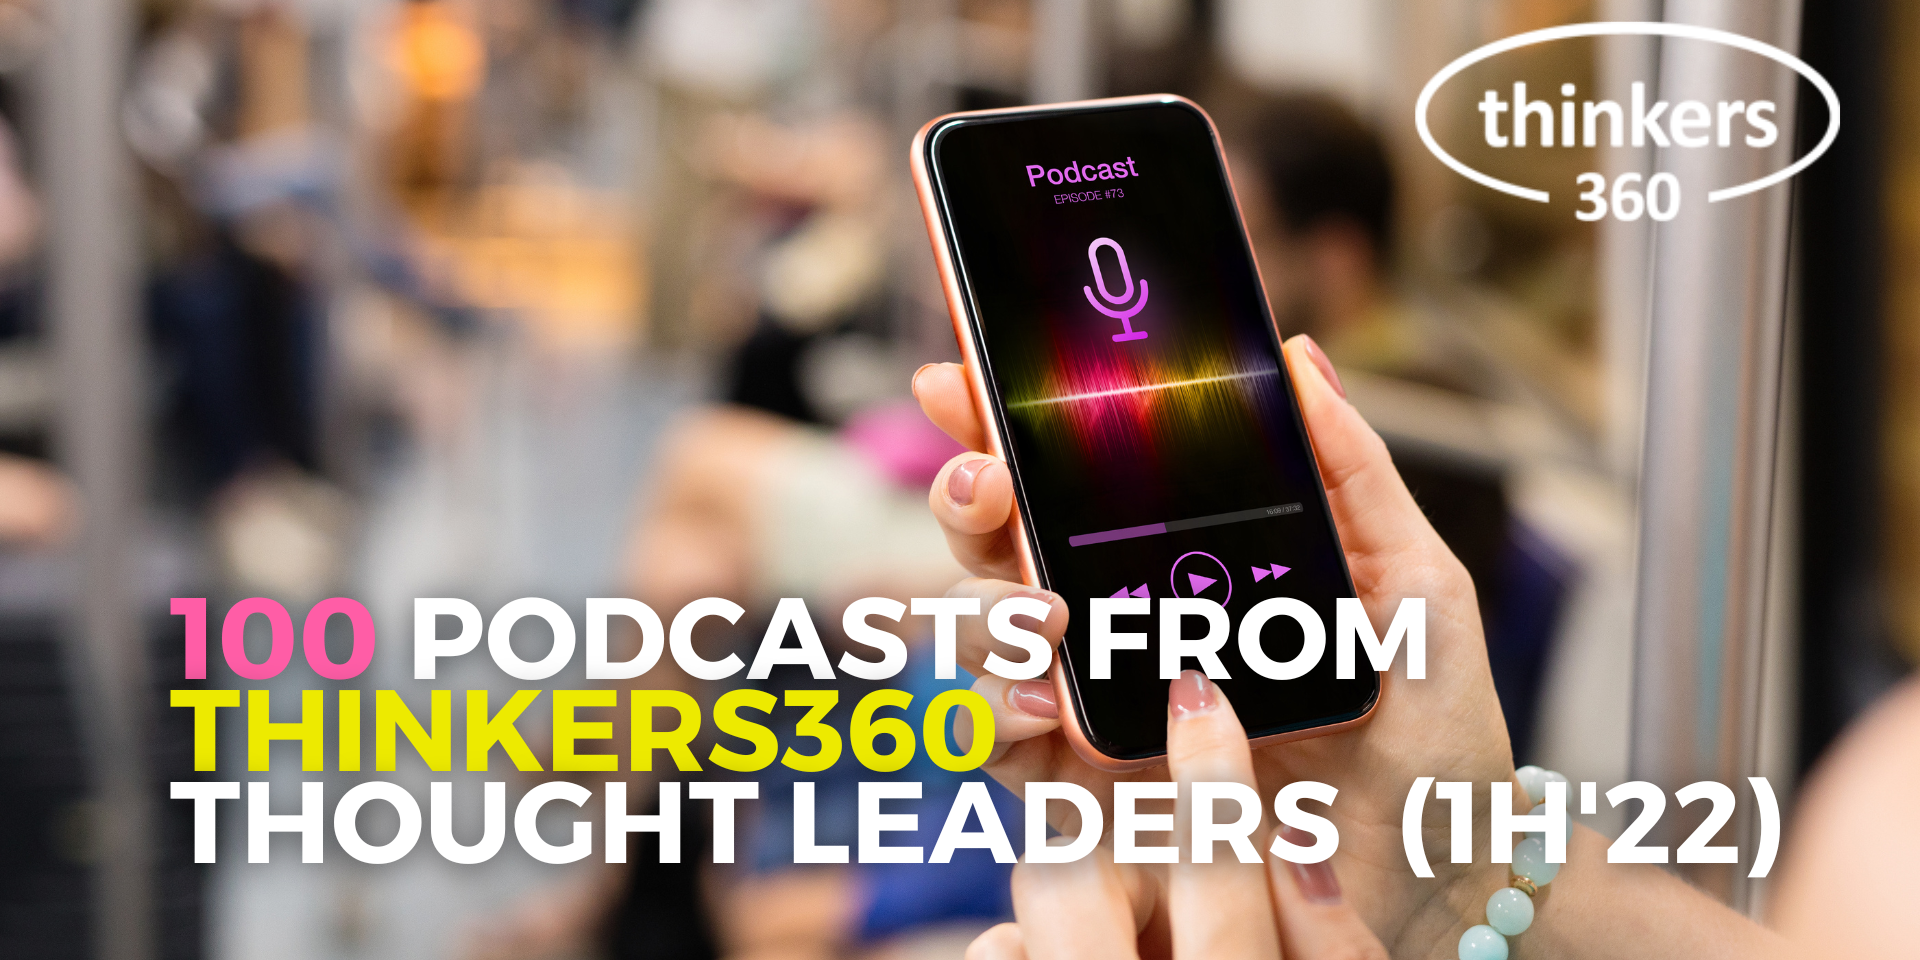 100 Podcasts from Thinkers360 Thought Leaders (1H’22)